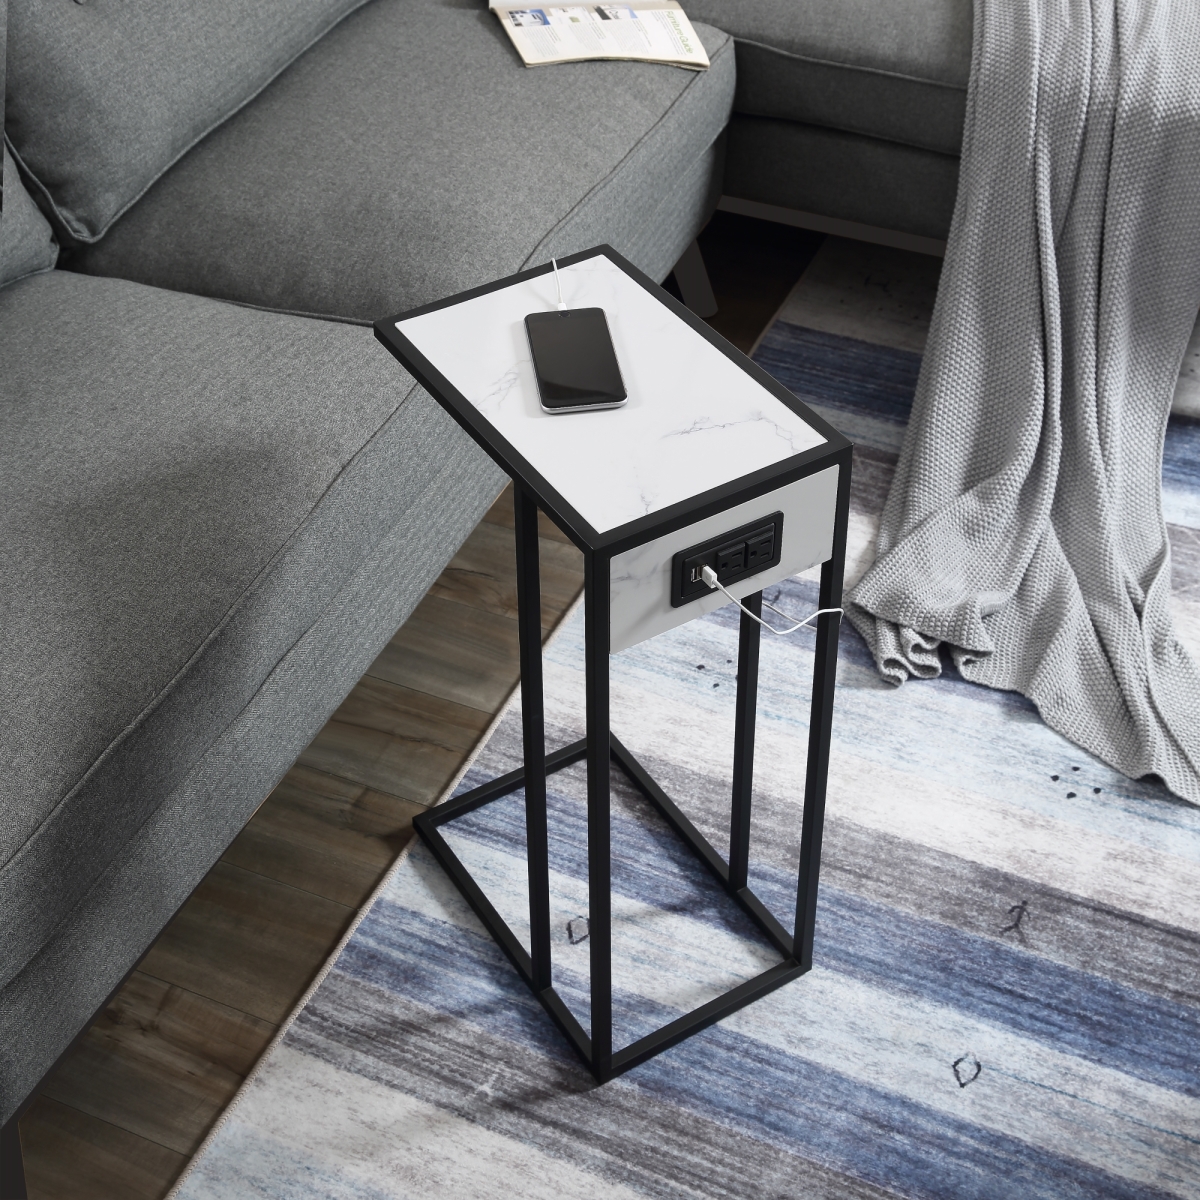 Let100-09we-ue Posh Living Cain C Table, End Table, Side Table & Laptop Stand, White & Black - 10.25 X 15.75 X 25.5 In.